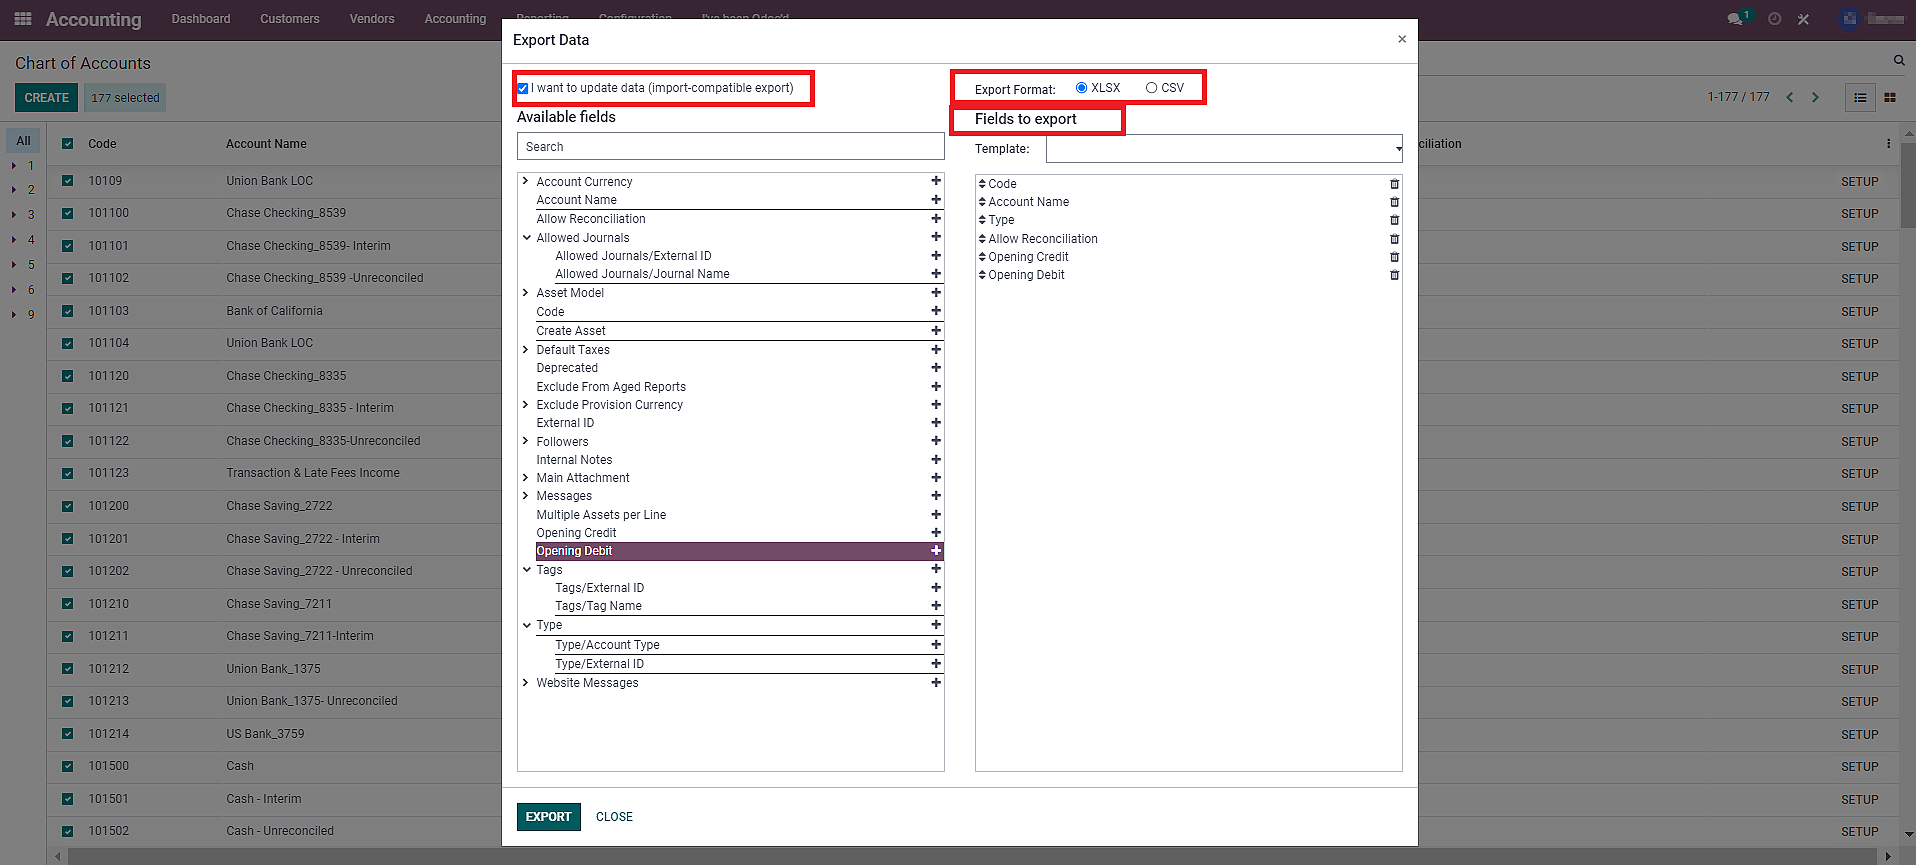 chart of accounts odoo You will see the information on the “Export Data” on the next screen.